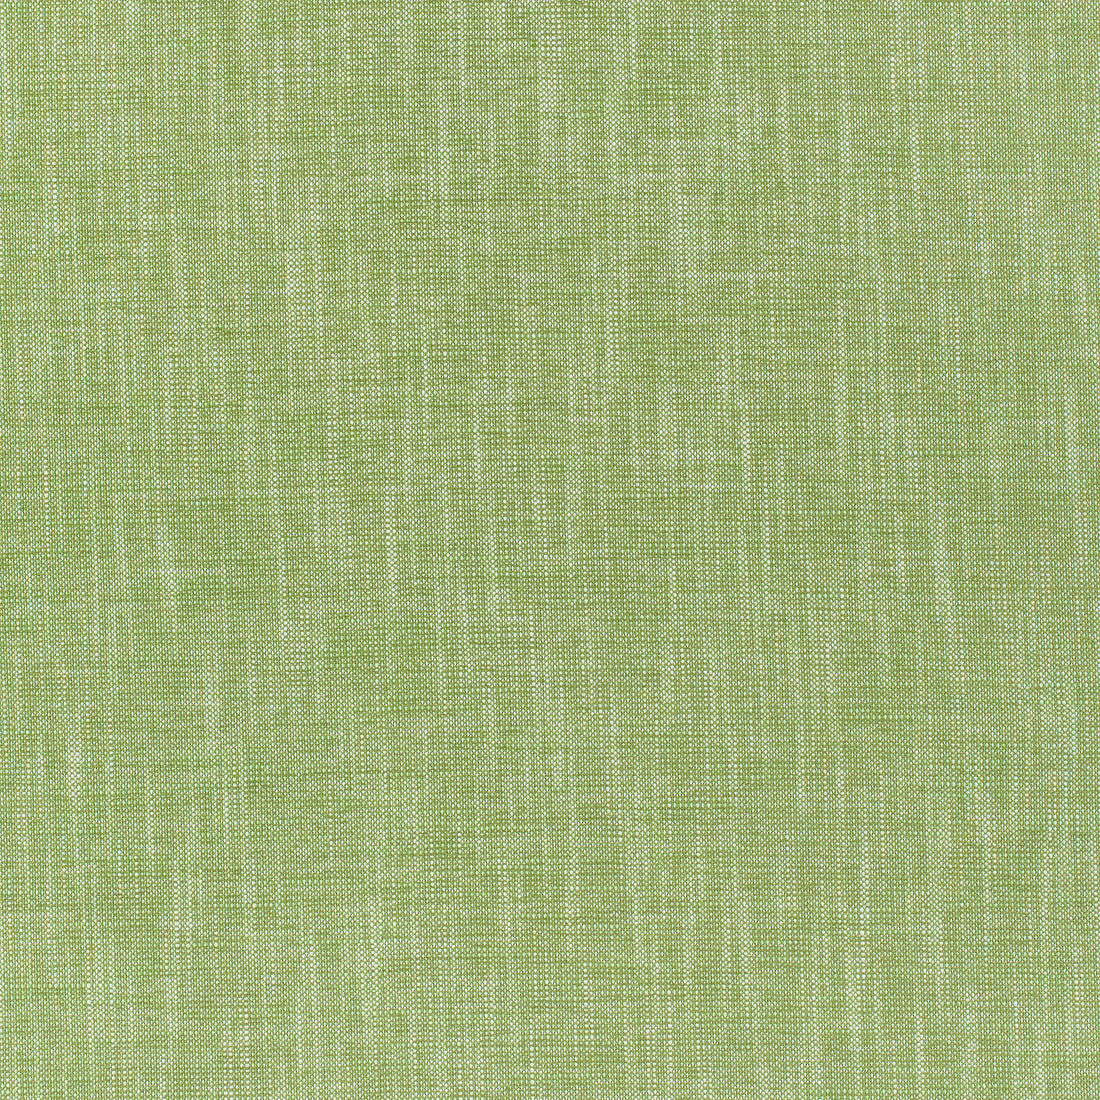 Bailey fabric in grass color - pattern number W80499 - by Thibaut in the Mosaic collection